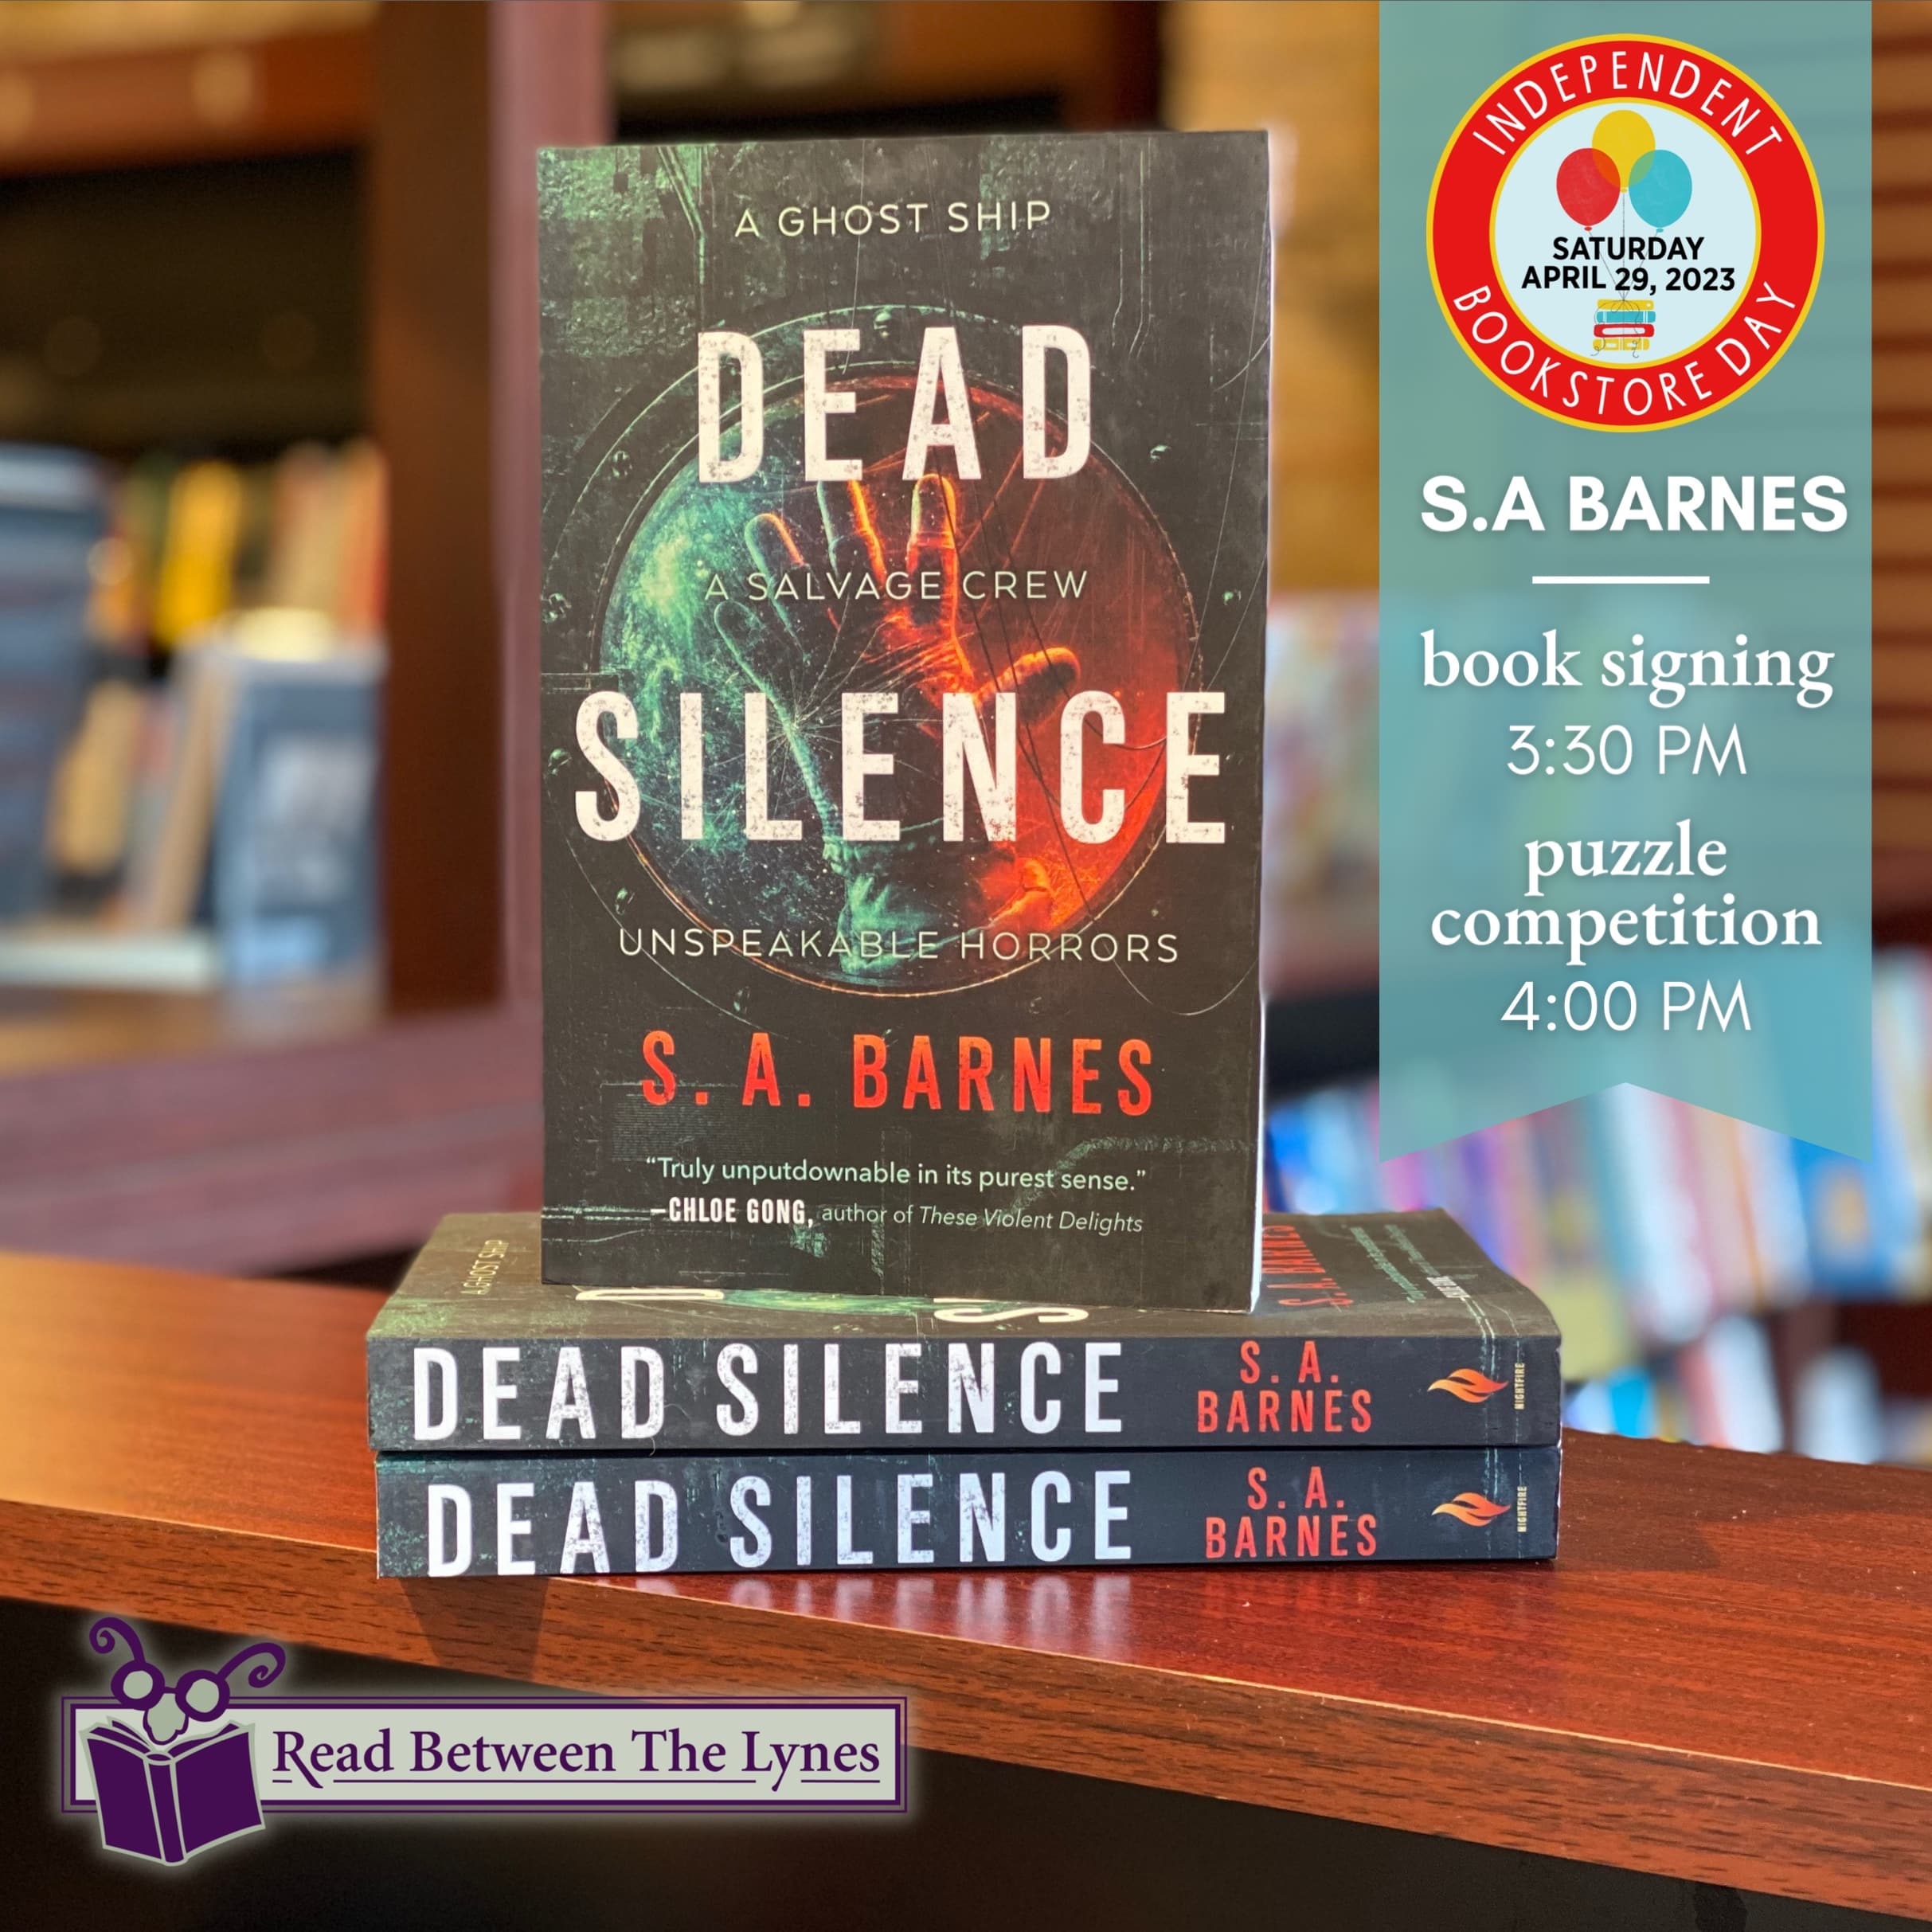 A visit (+ puzzle competition) with author S.A. Barnes at Read Between The Lynes